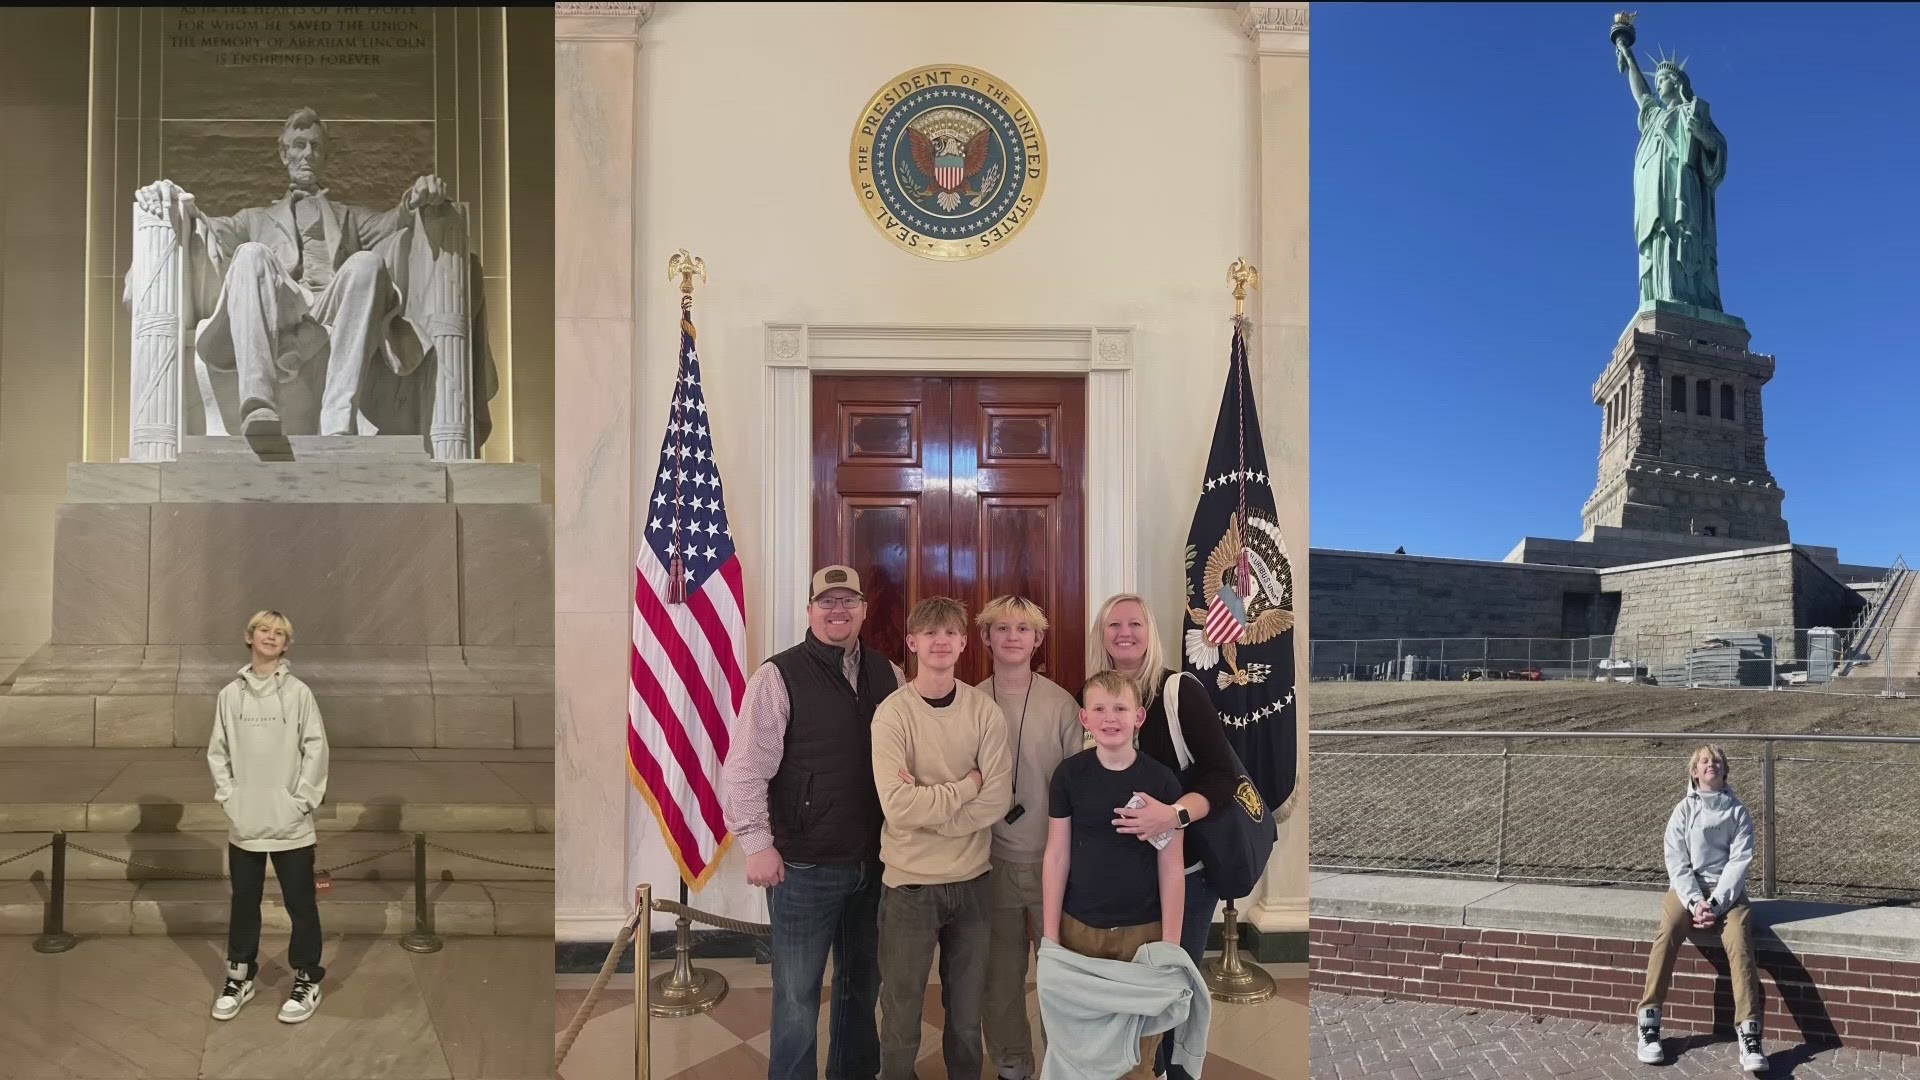 Parker Pannell, 13, has been slowly losing his sight since Christmas. The community rallied to send him to Washington DC and New York to see the sights.